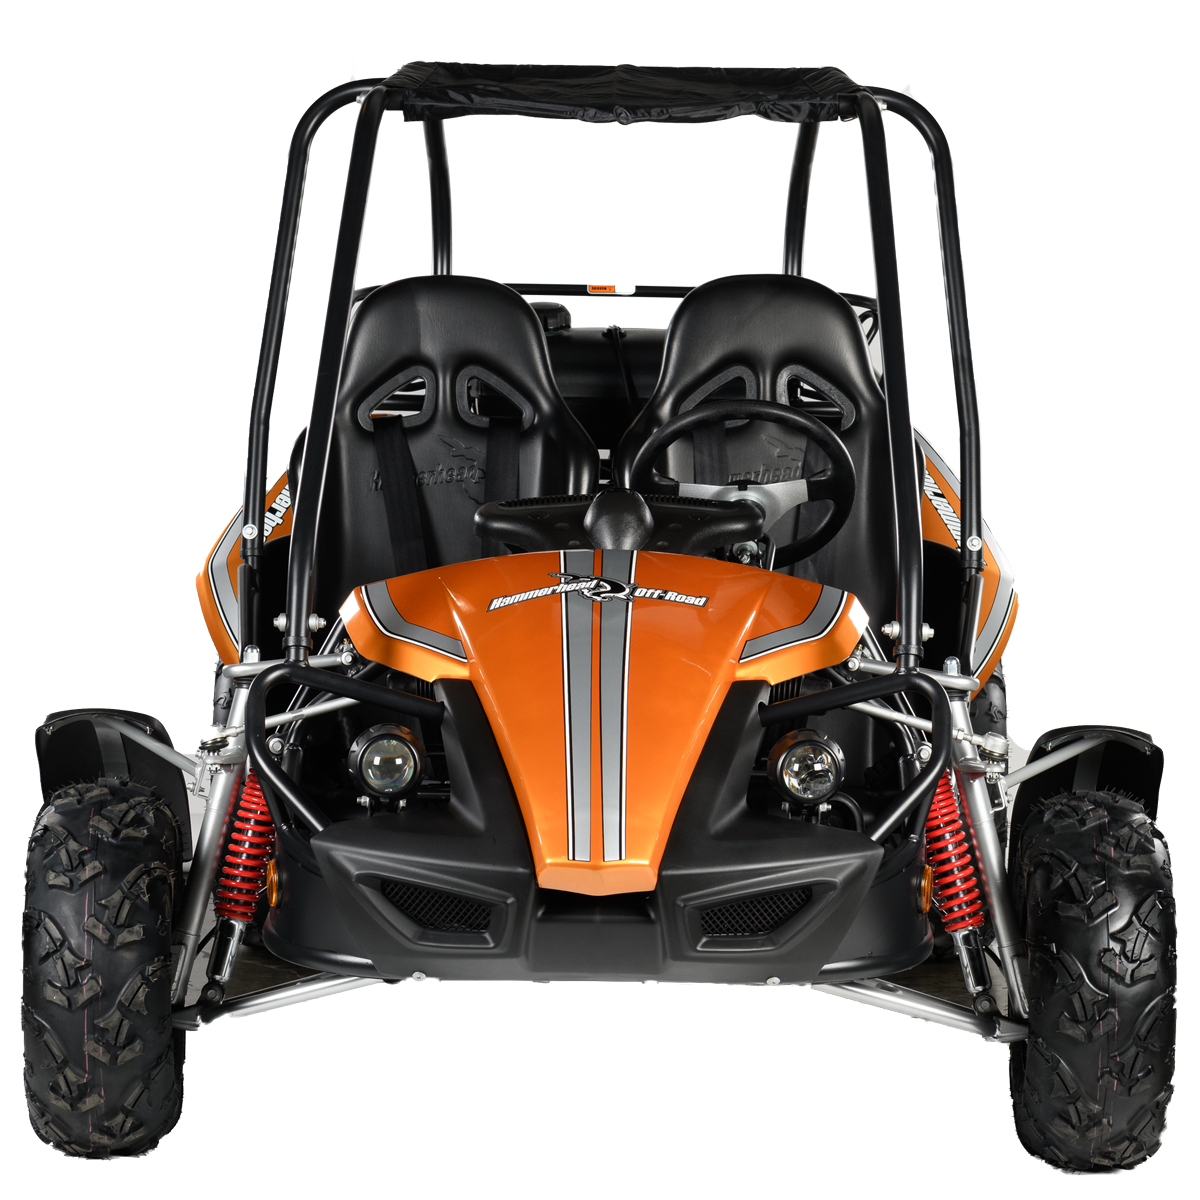 hammerhead-gts150-buggy-with-usa-specs-orange-front-view